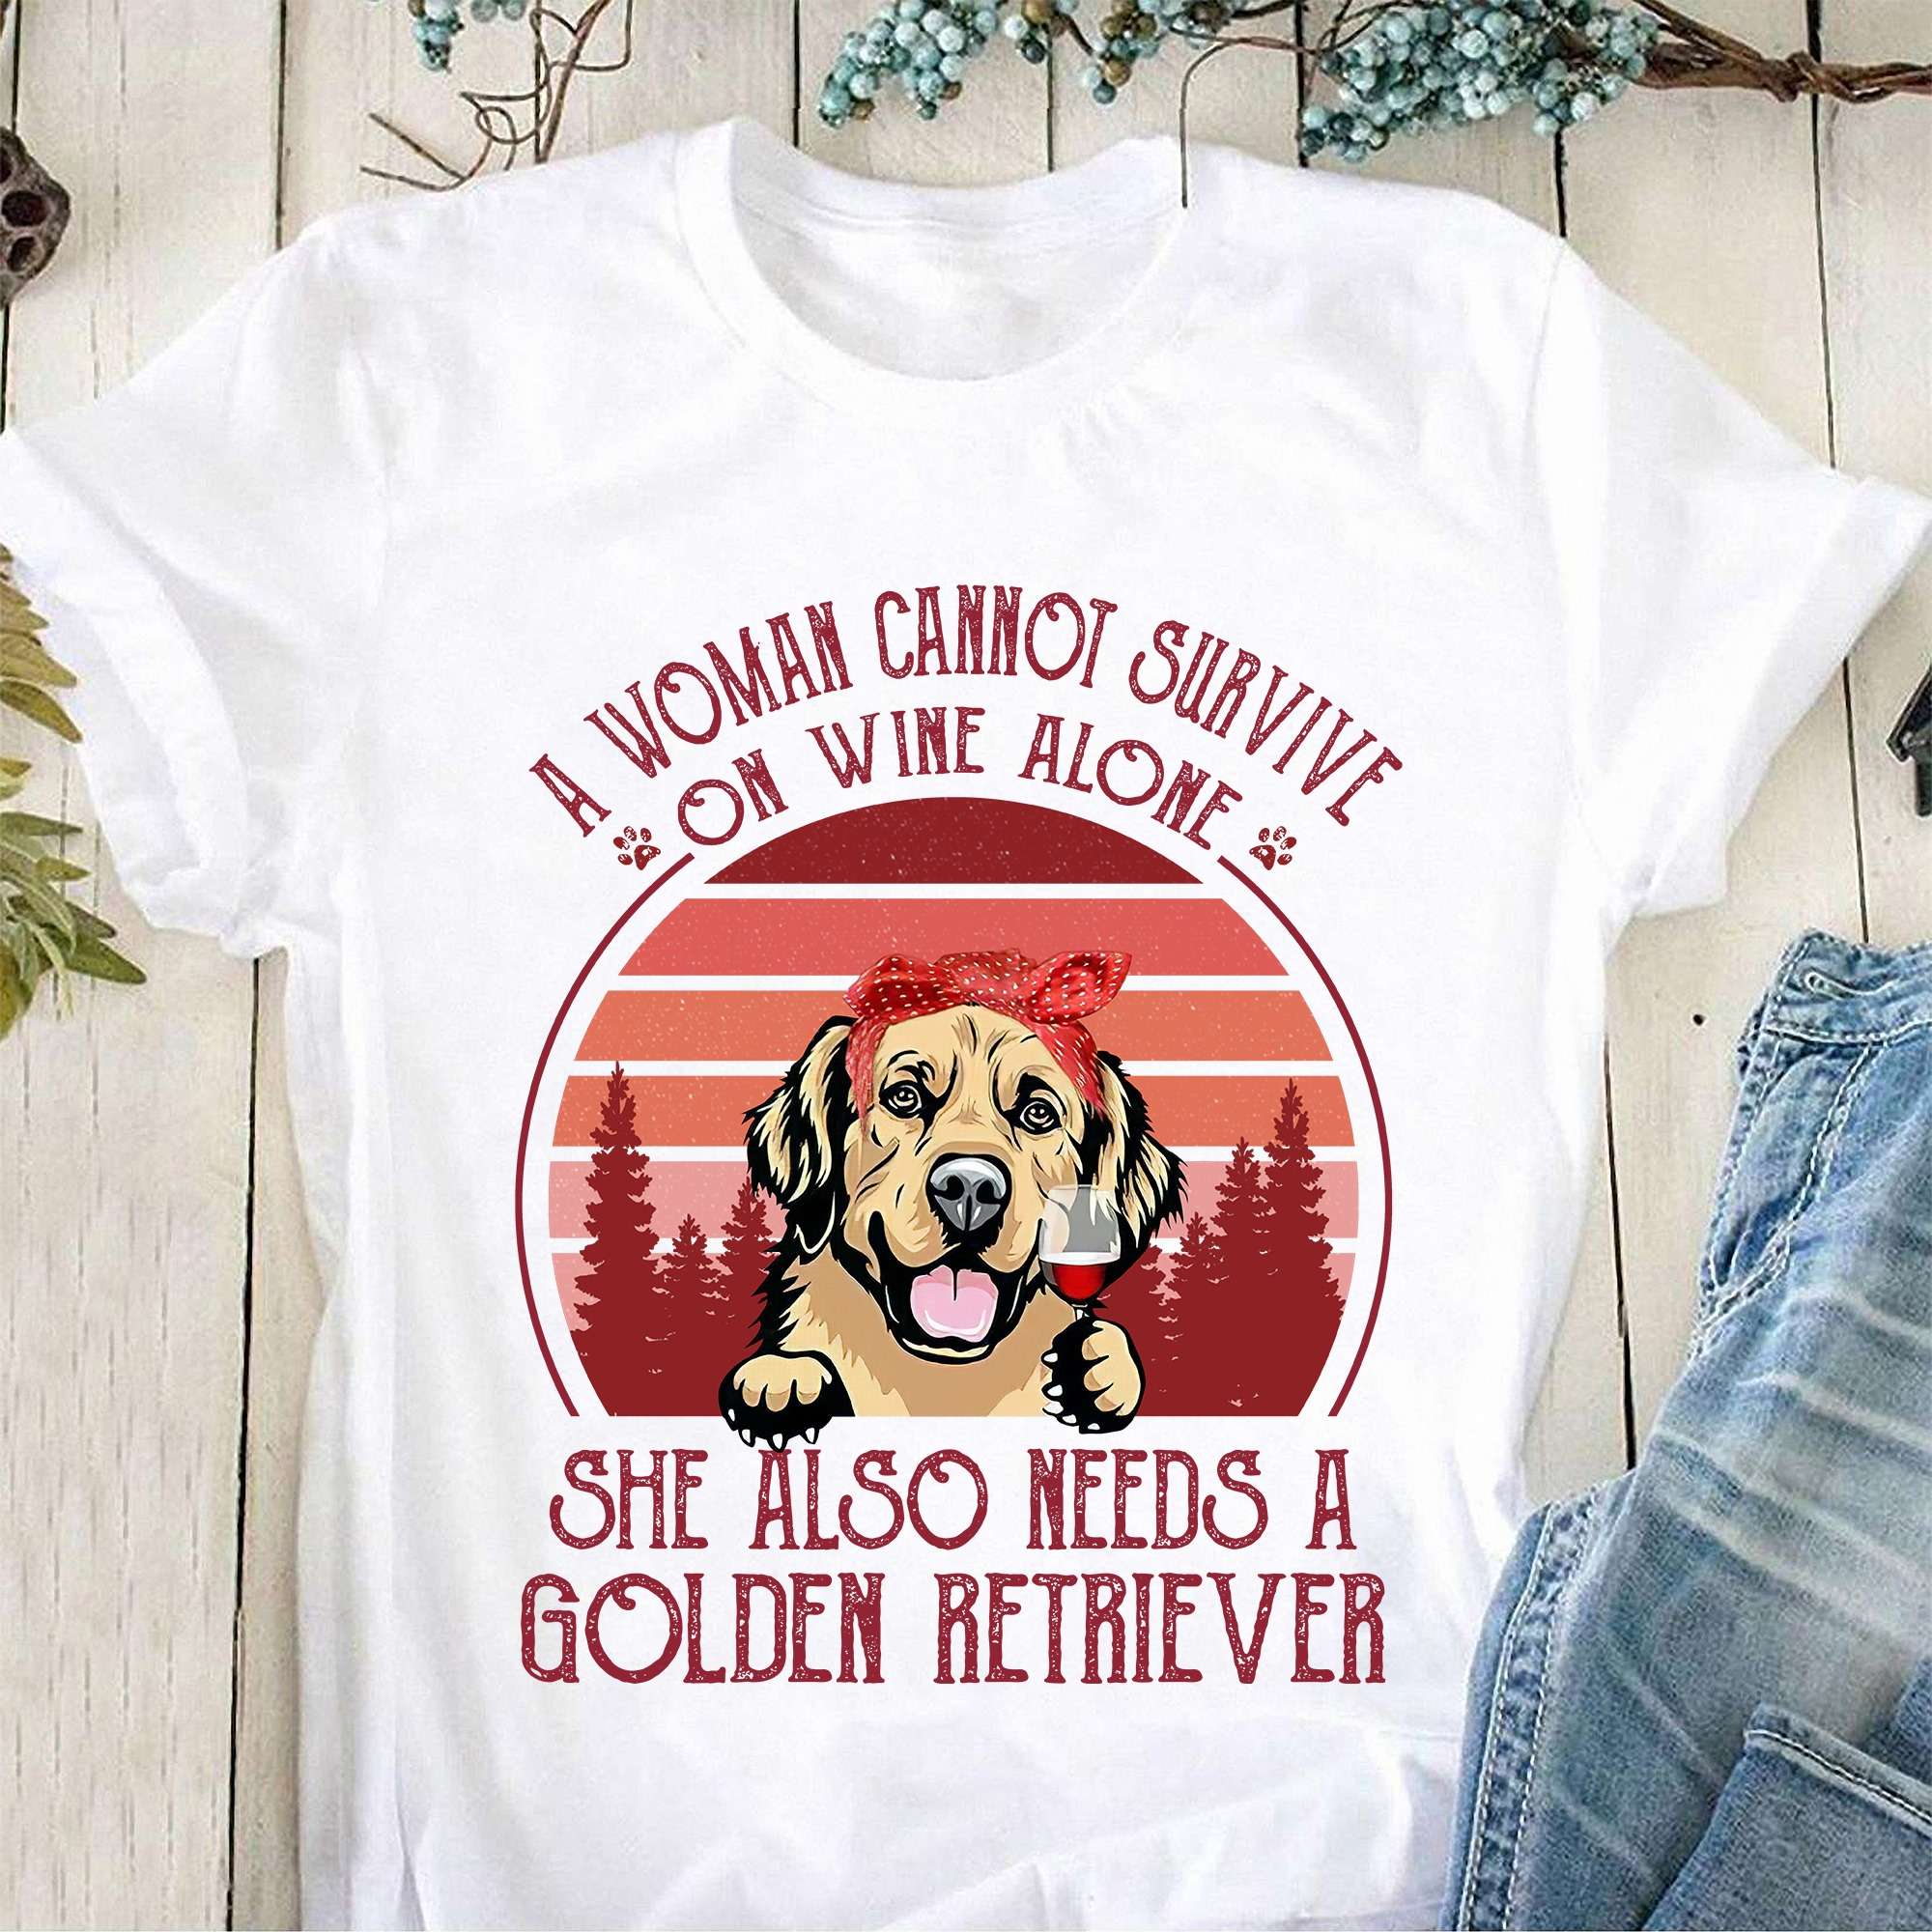 Golden Retriever With Wine - A woman cannot survive on wine alone she also needs a golden retriever